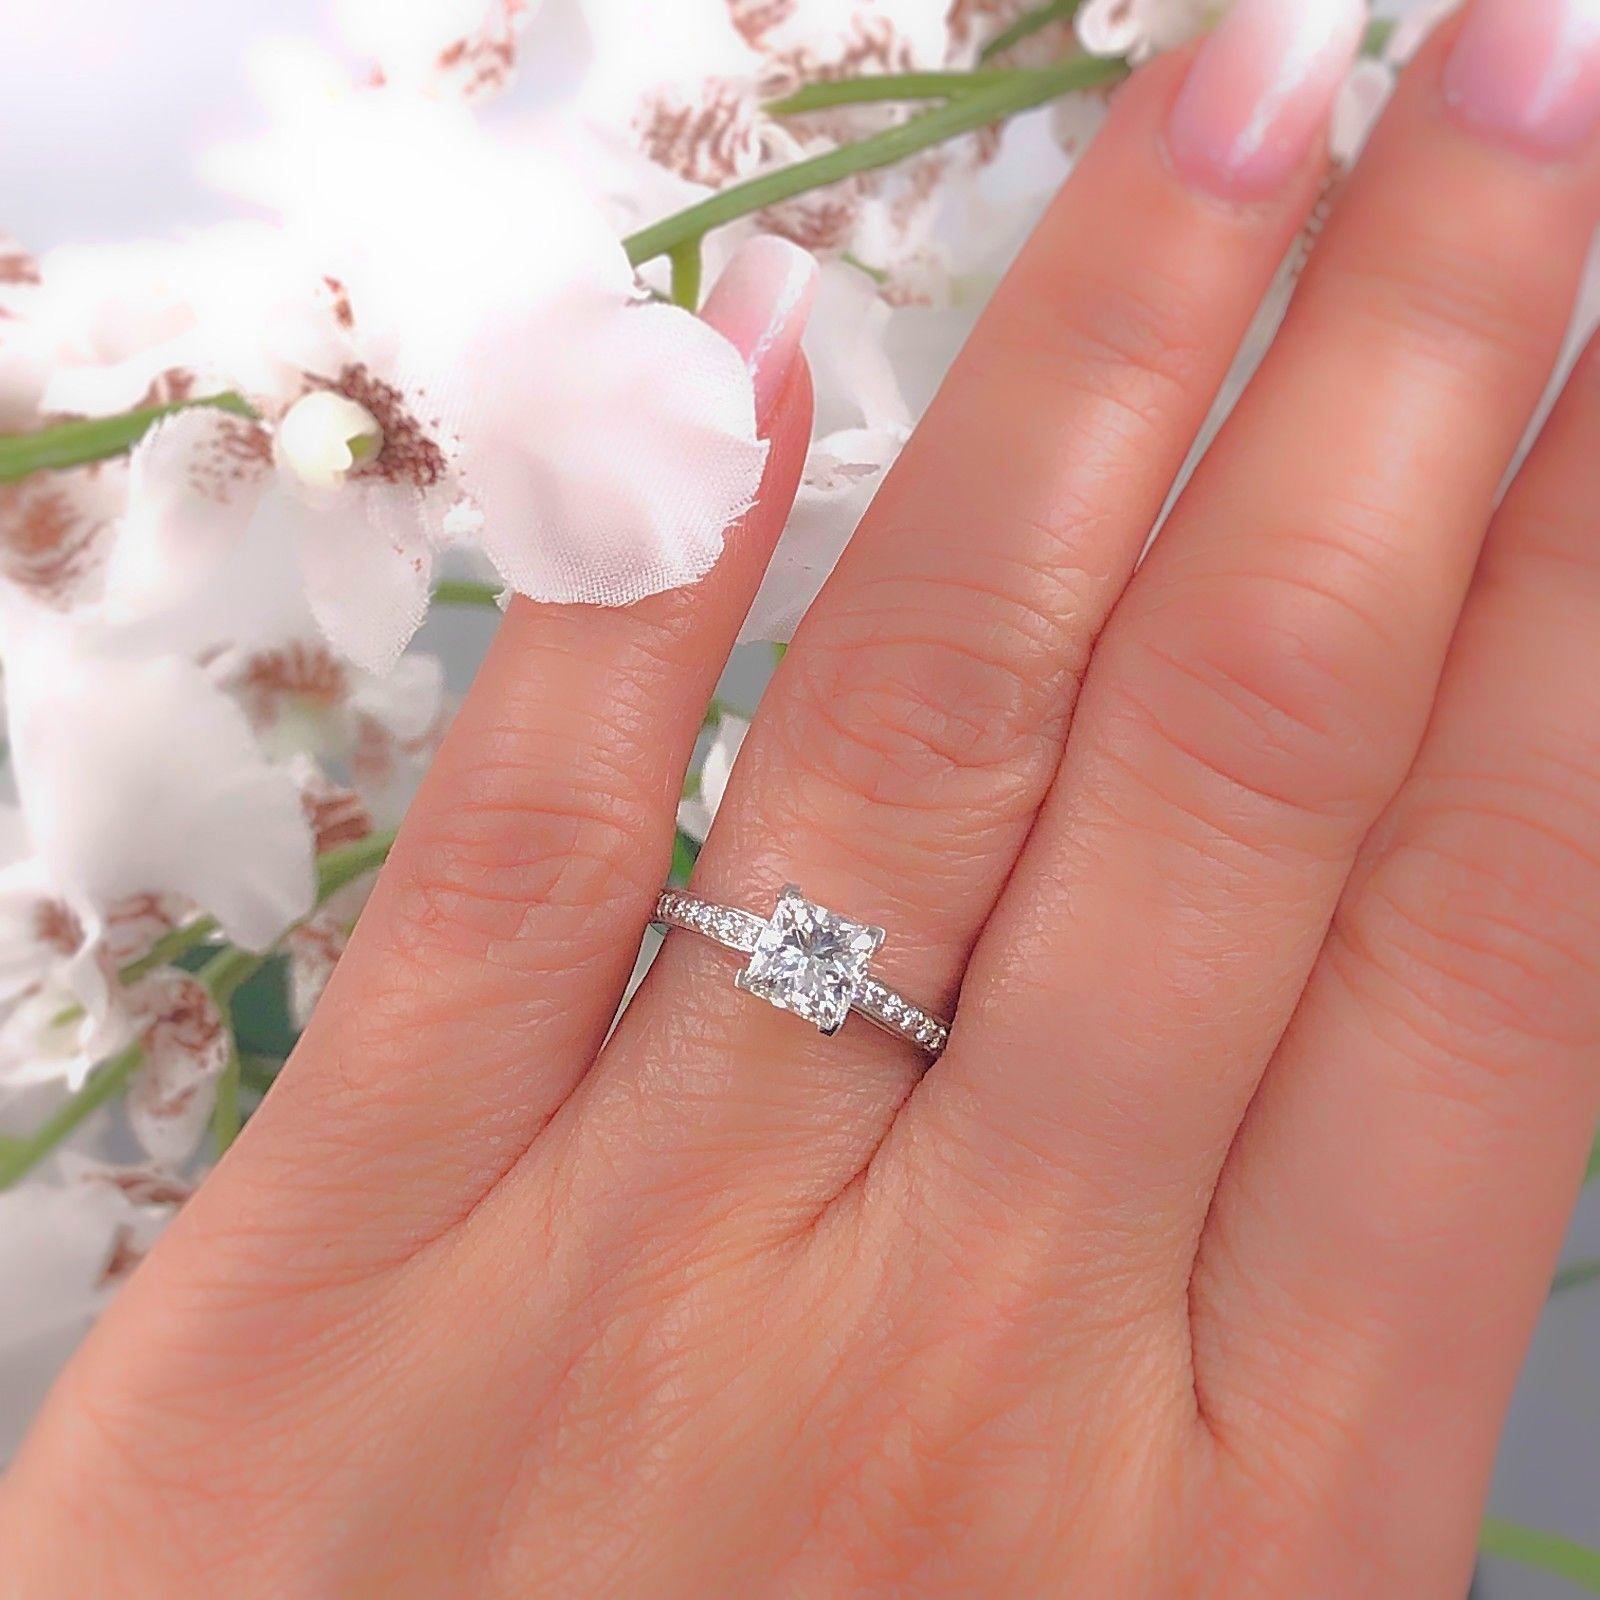 Tiffany & Co. Diamond Engagement Ring
Style:  Tiffany Grace
Serial Number:  # 33682646
Metal:  Platinum PT950
Size:  5.75 - Sizable
Total Carat Weight:  1.29 tcw
Diamond Shape:  Center Diamond - Princess Cut 1.09 cts H color, VVS1 clarity
Accent